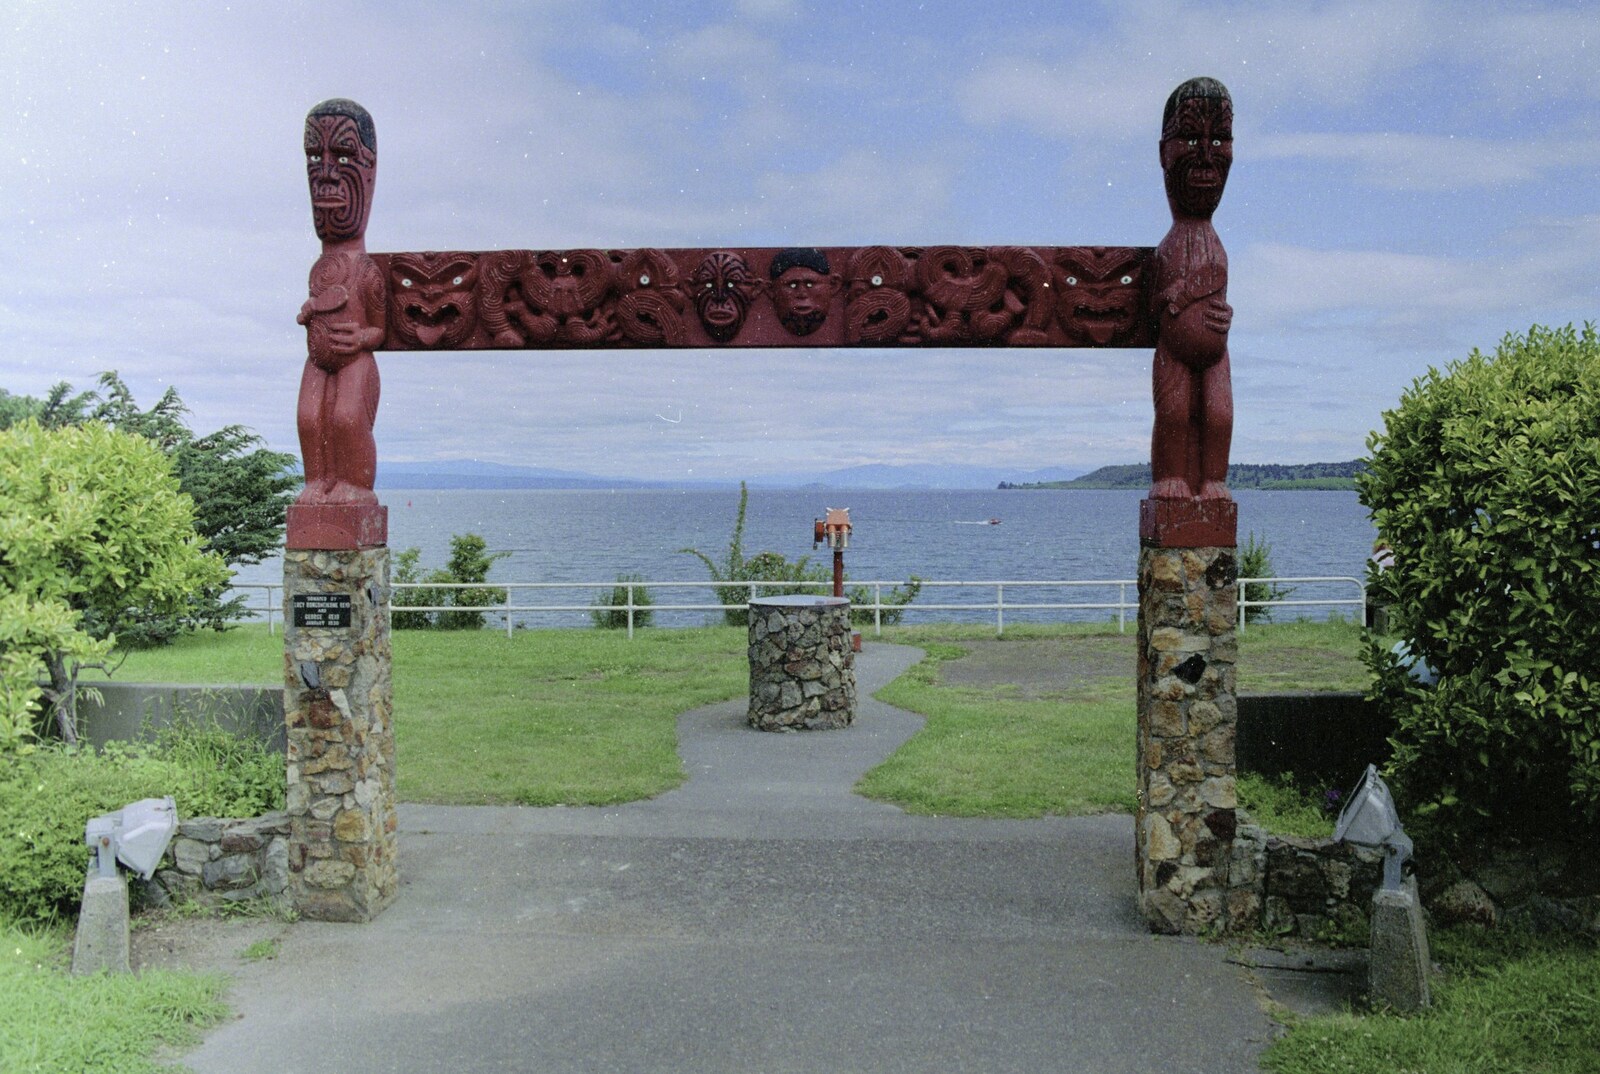 A Maori gate on the shores of Lake Taupo from A Road-trip Through Rotorua to Palmerston, North Island, New Zealand - 27th November 1992